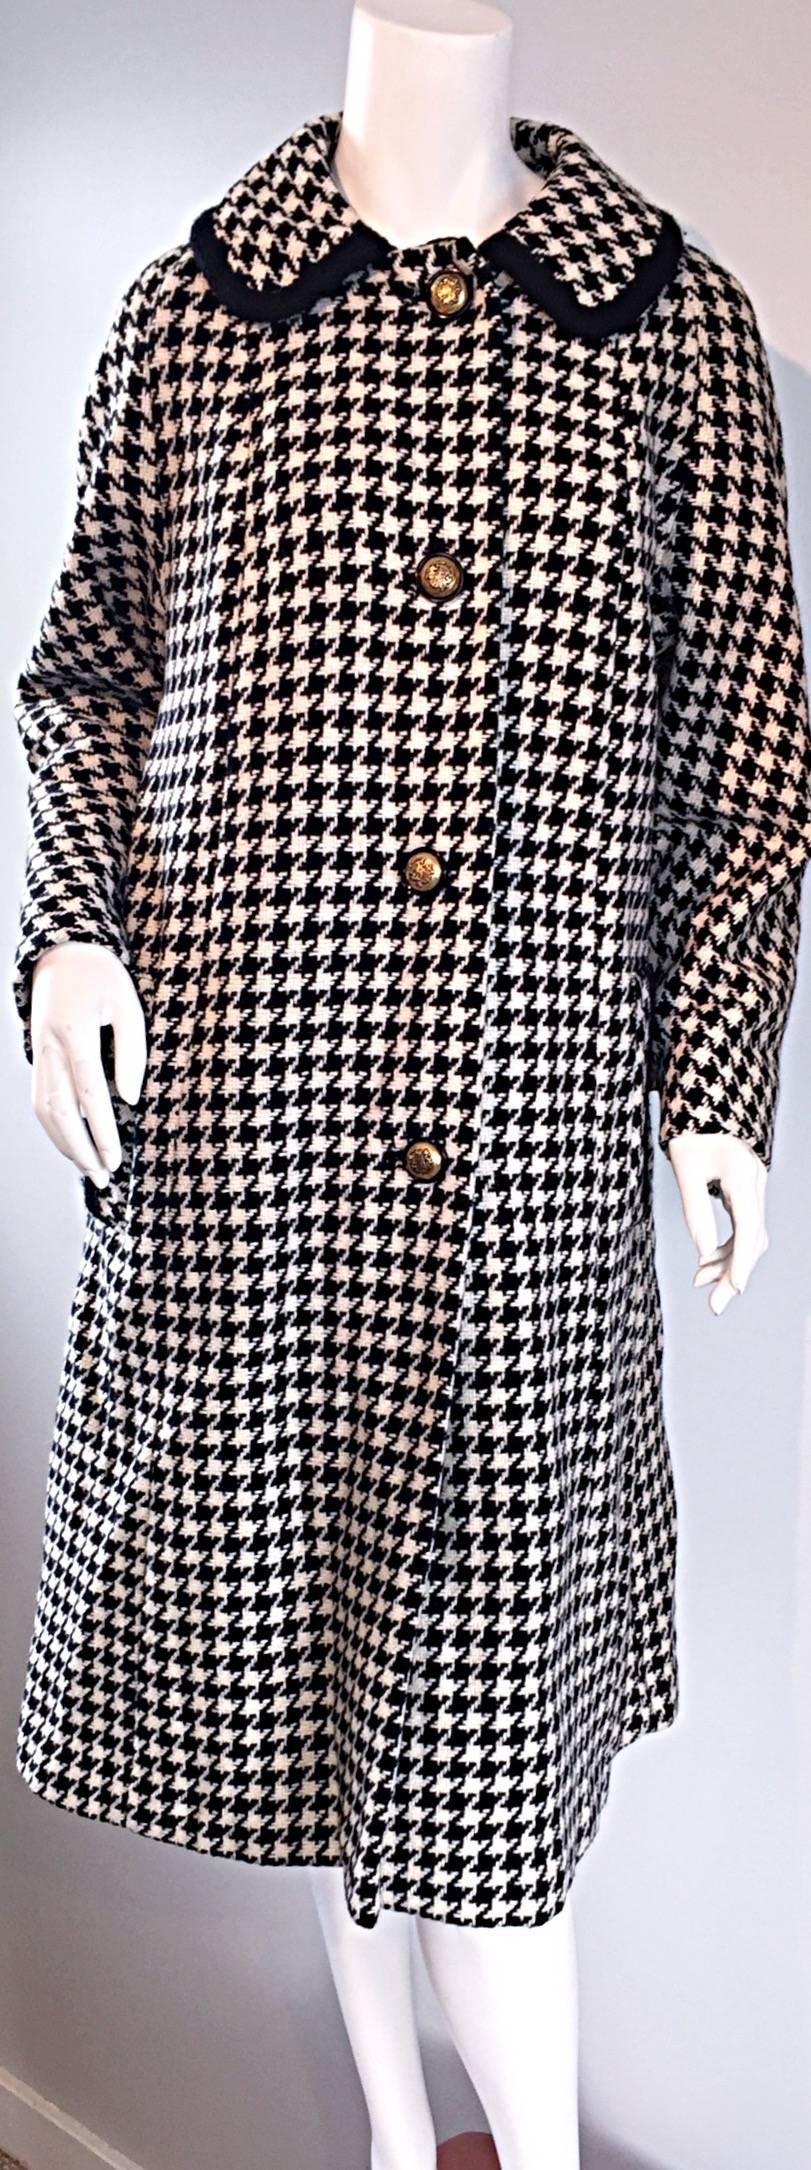 Adorable vintage wool swing jacket! Features all over black and white gingham print, with black embroidered trim at each sleeve cuff, each waist pocket, and on the collar. Jackie-O style, with a classic feminine collar, and engraved brass buttons up